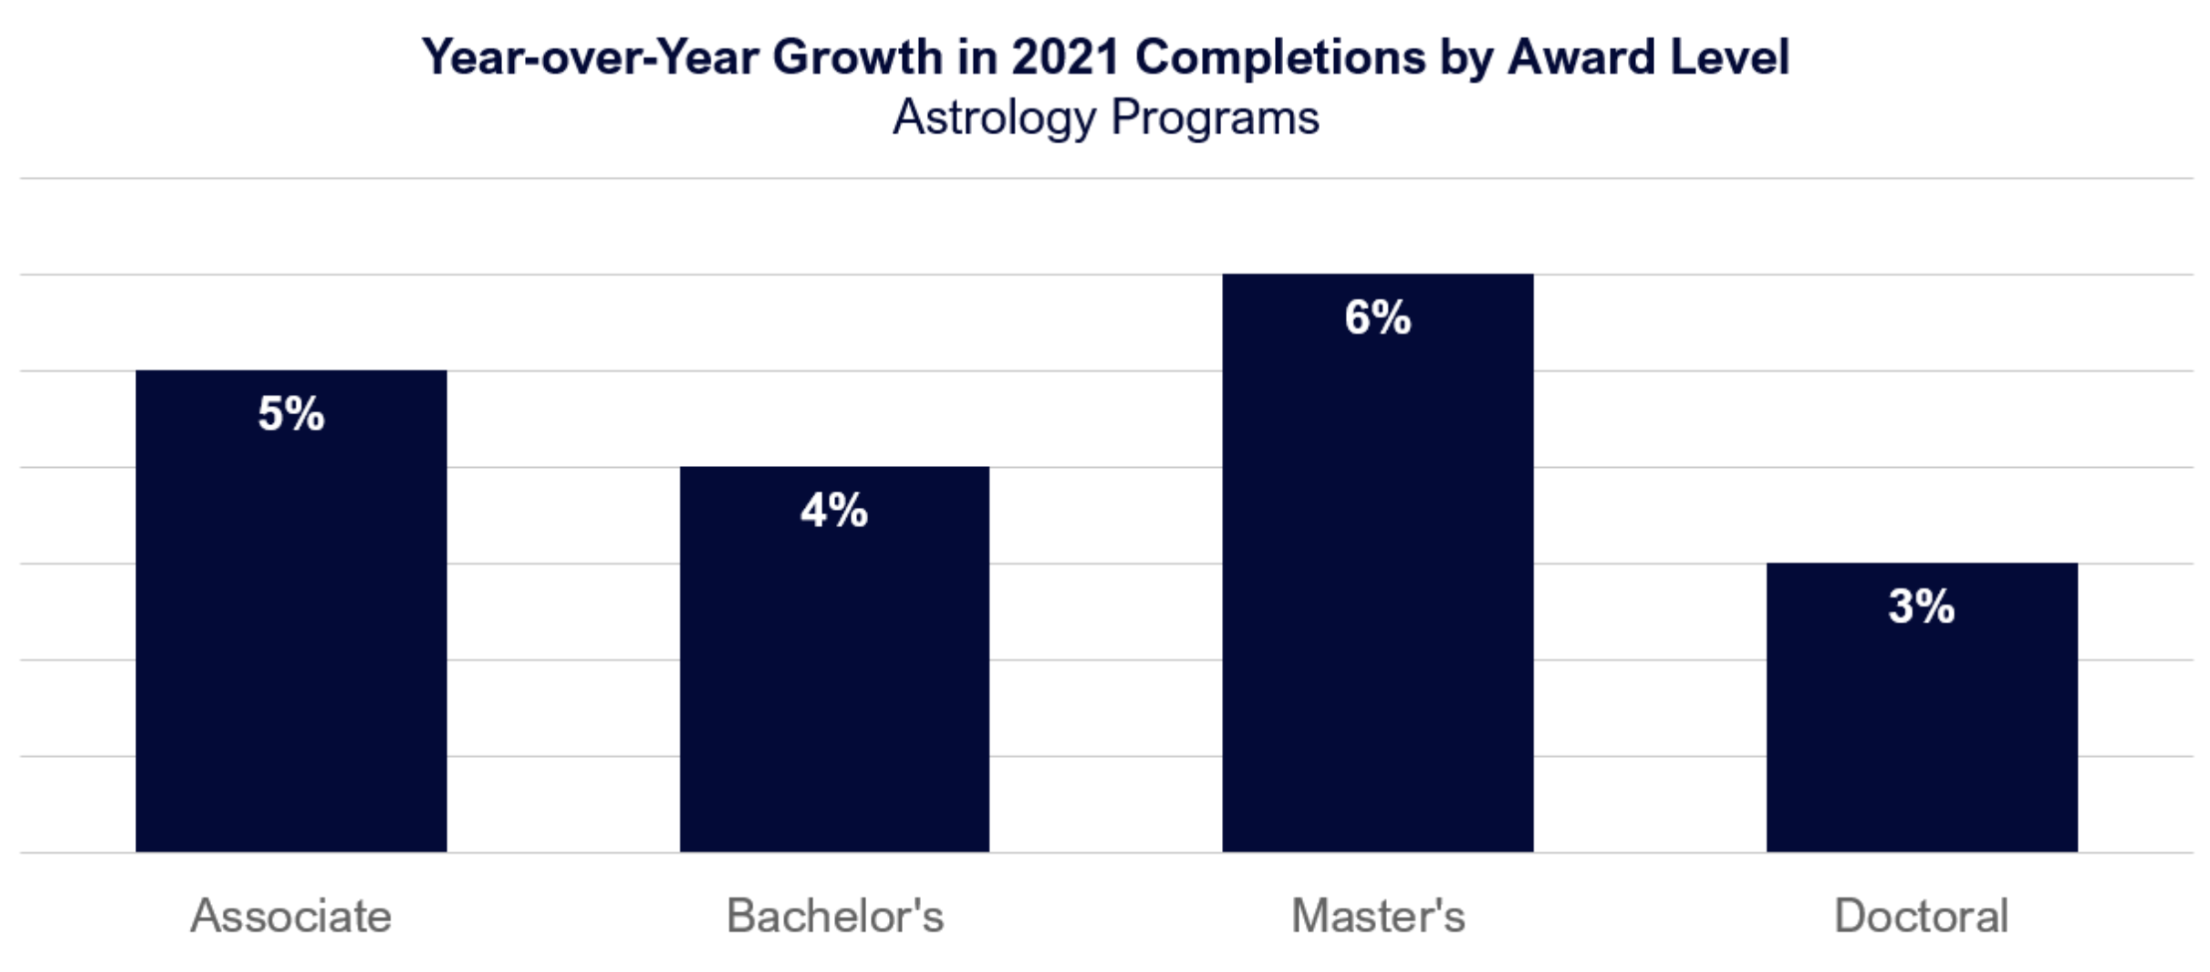 Year over year growth in 2021 completions by award level (Astrology Programs)